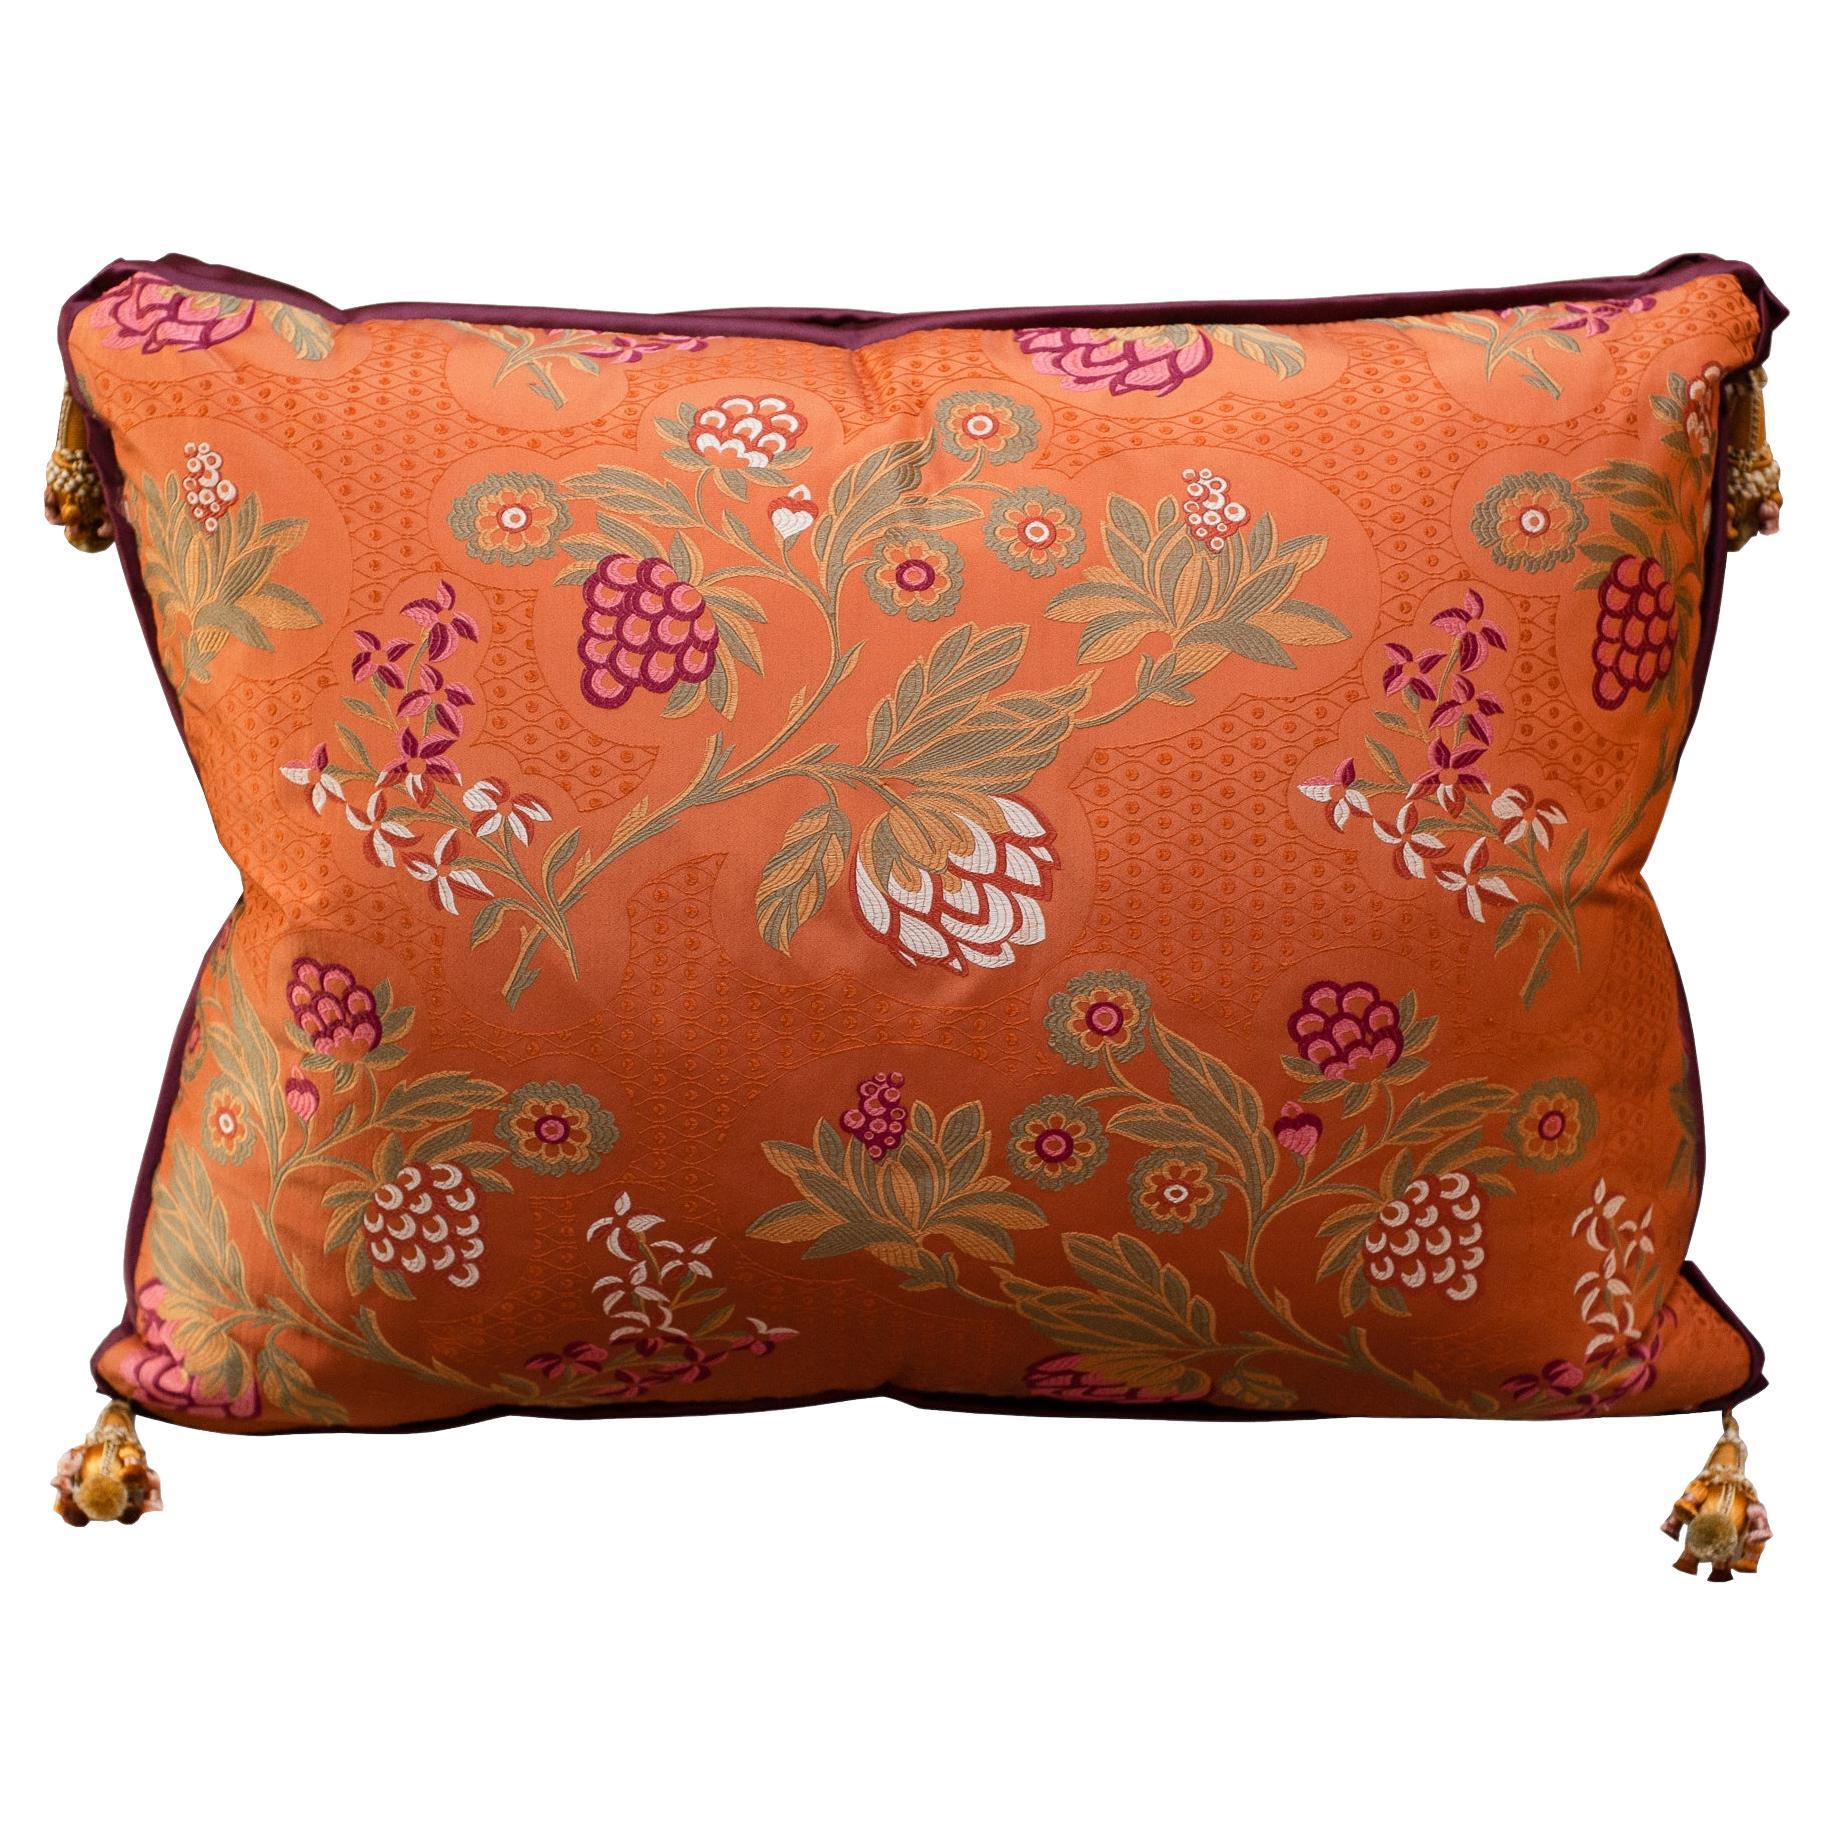 Contemporary Red-Orange Silk Brocade Pillow with Ornate Floral Embroidery